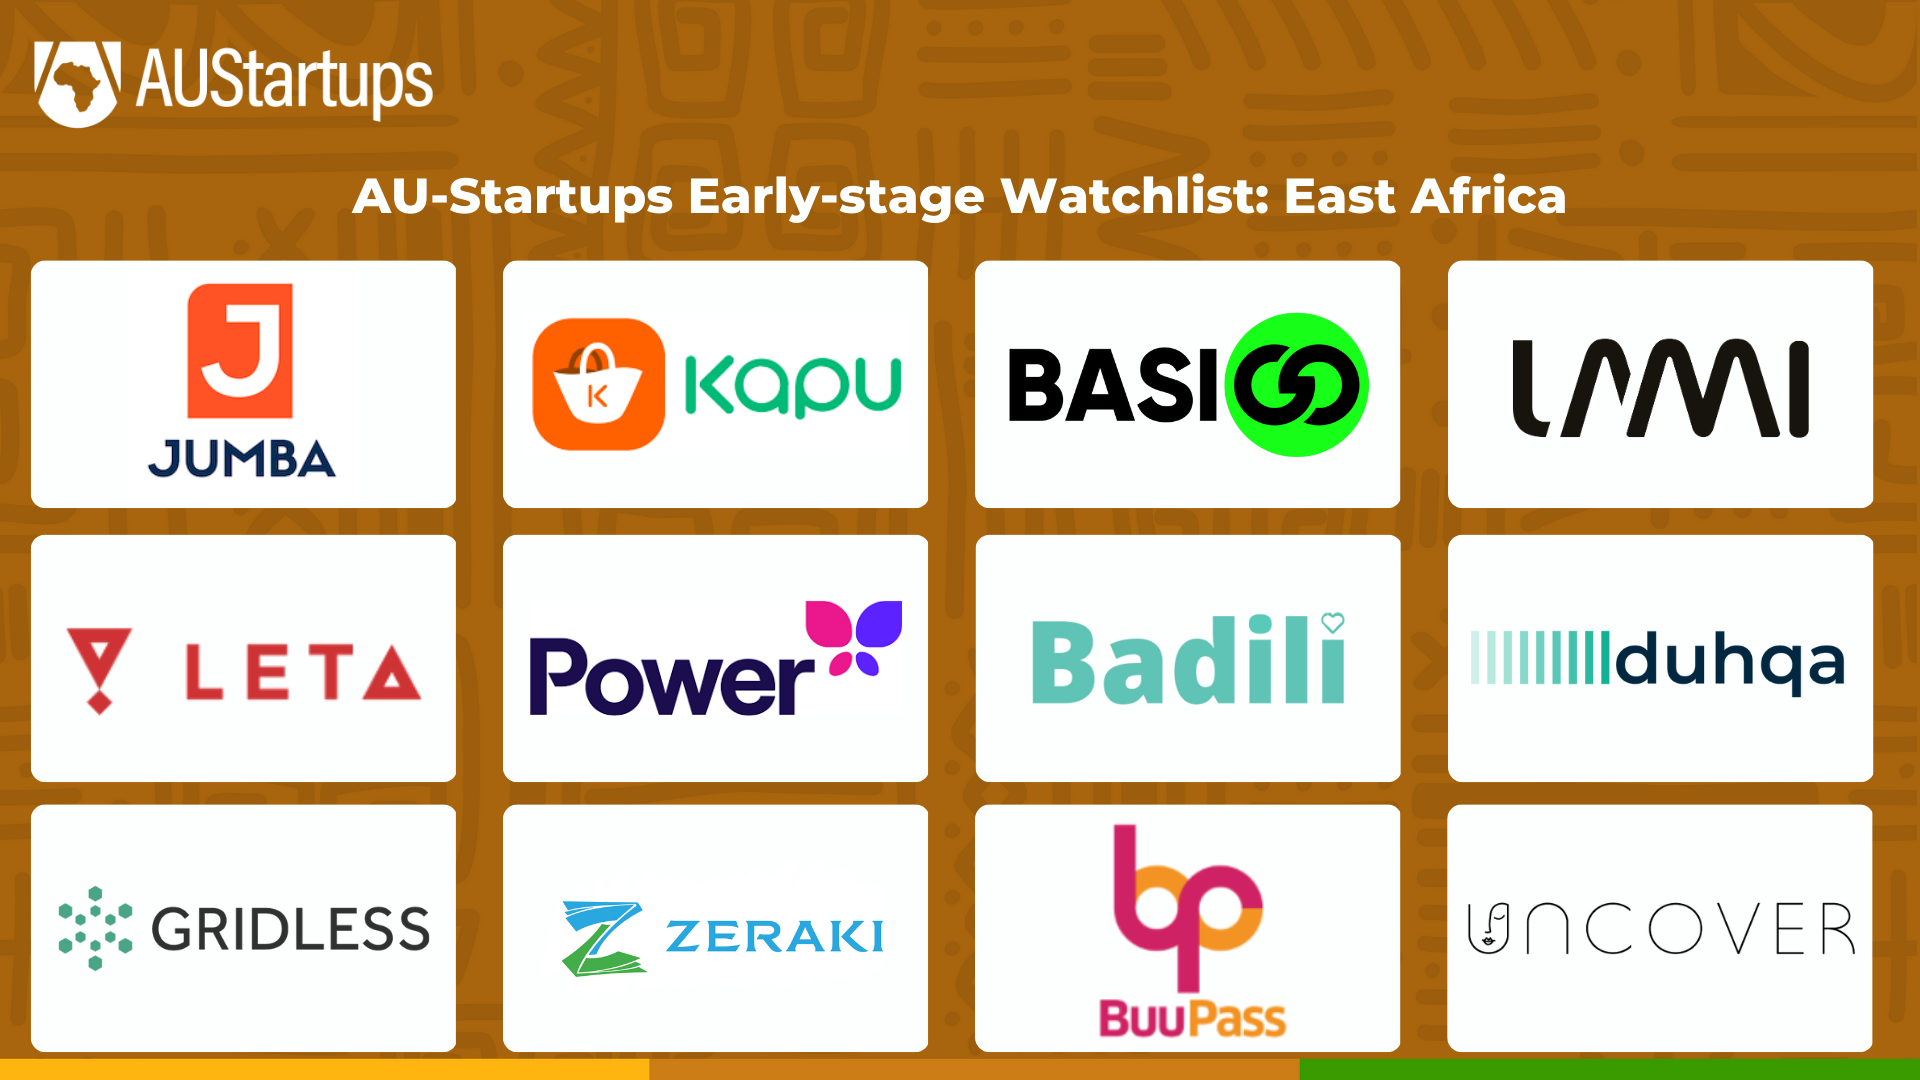 AU-Startups Early-stage Watchlist East Africa